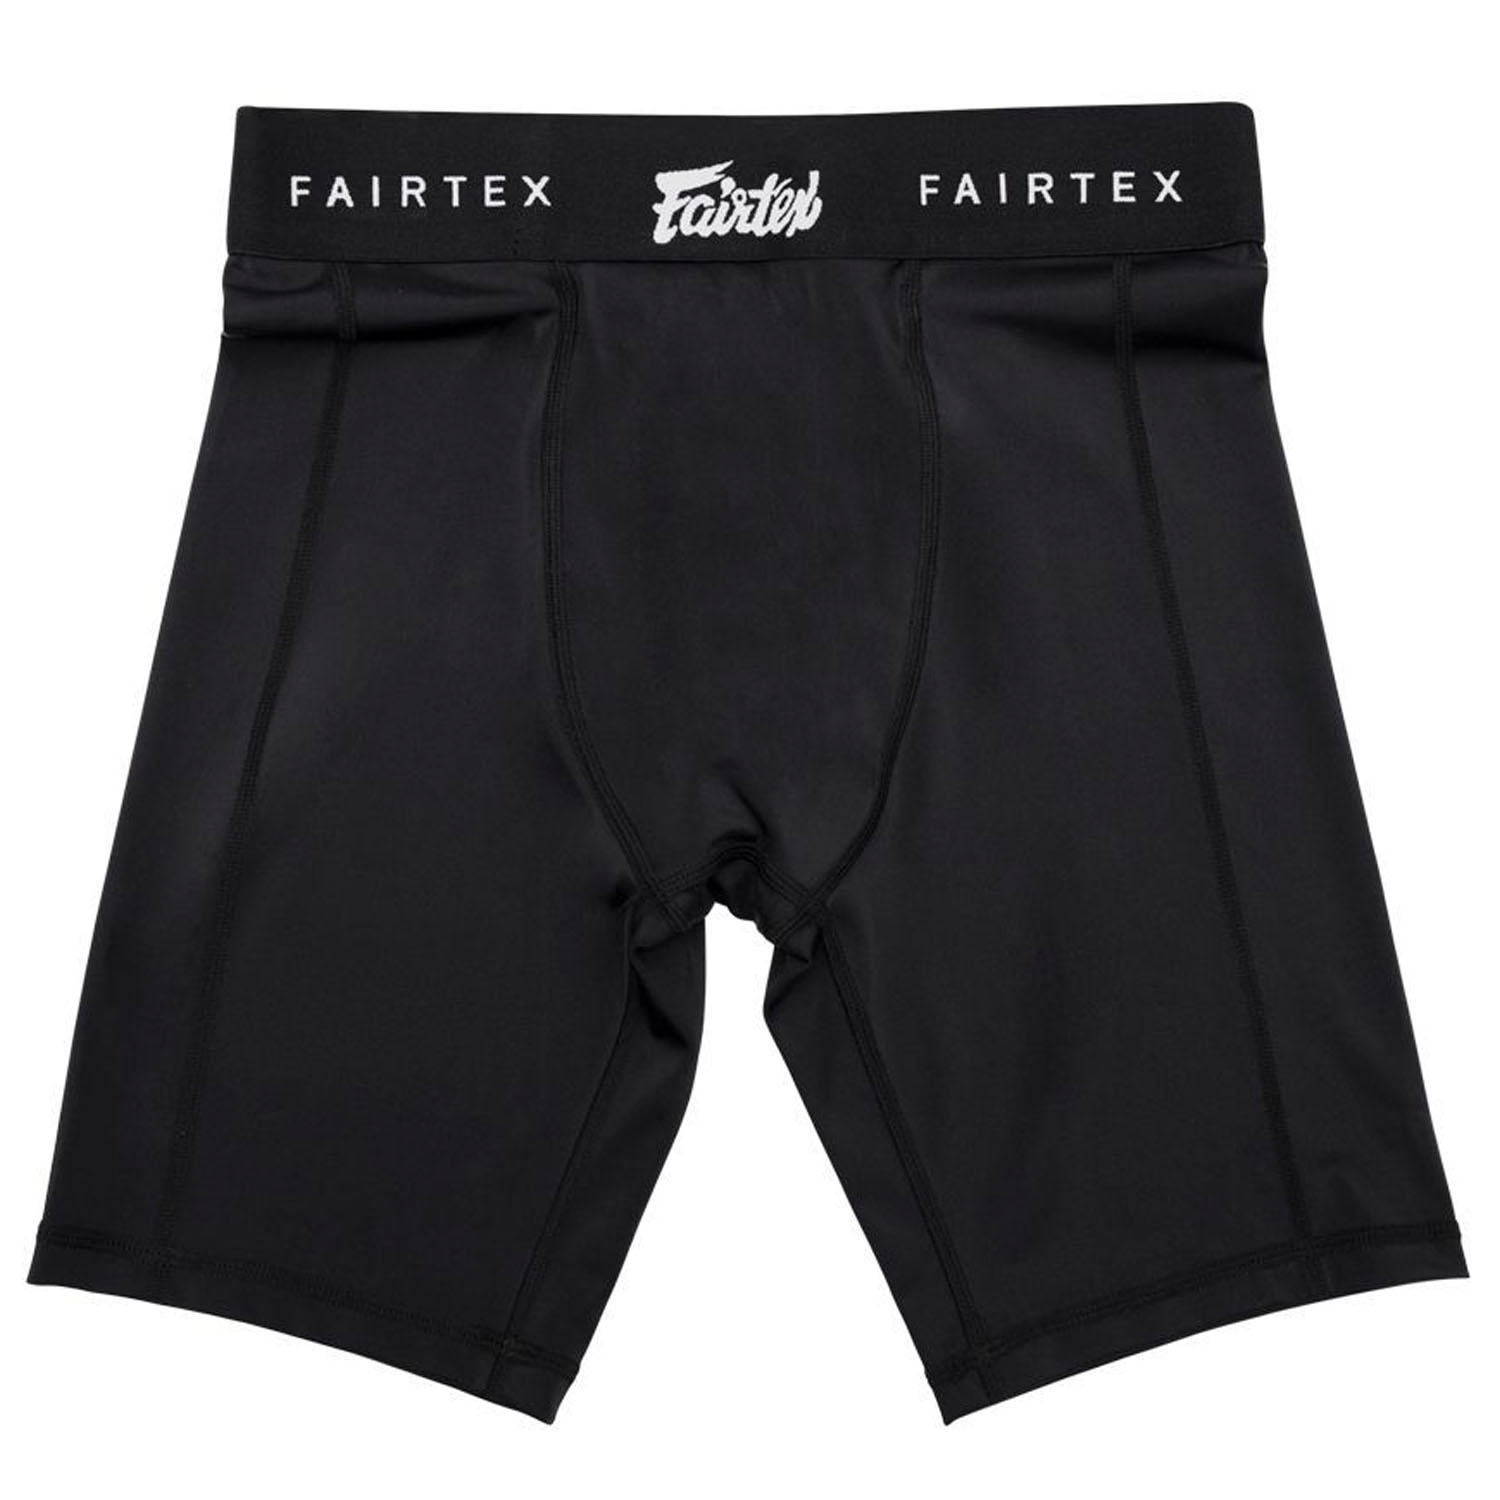 Fairtex Compression Shorts, with Athletic Cup, GC3, black